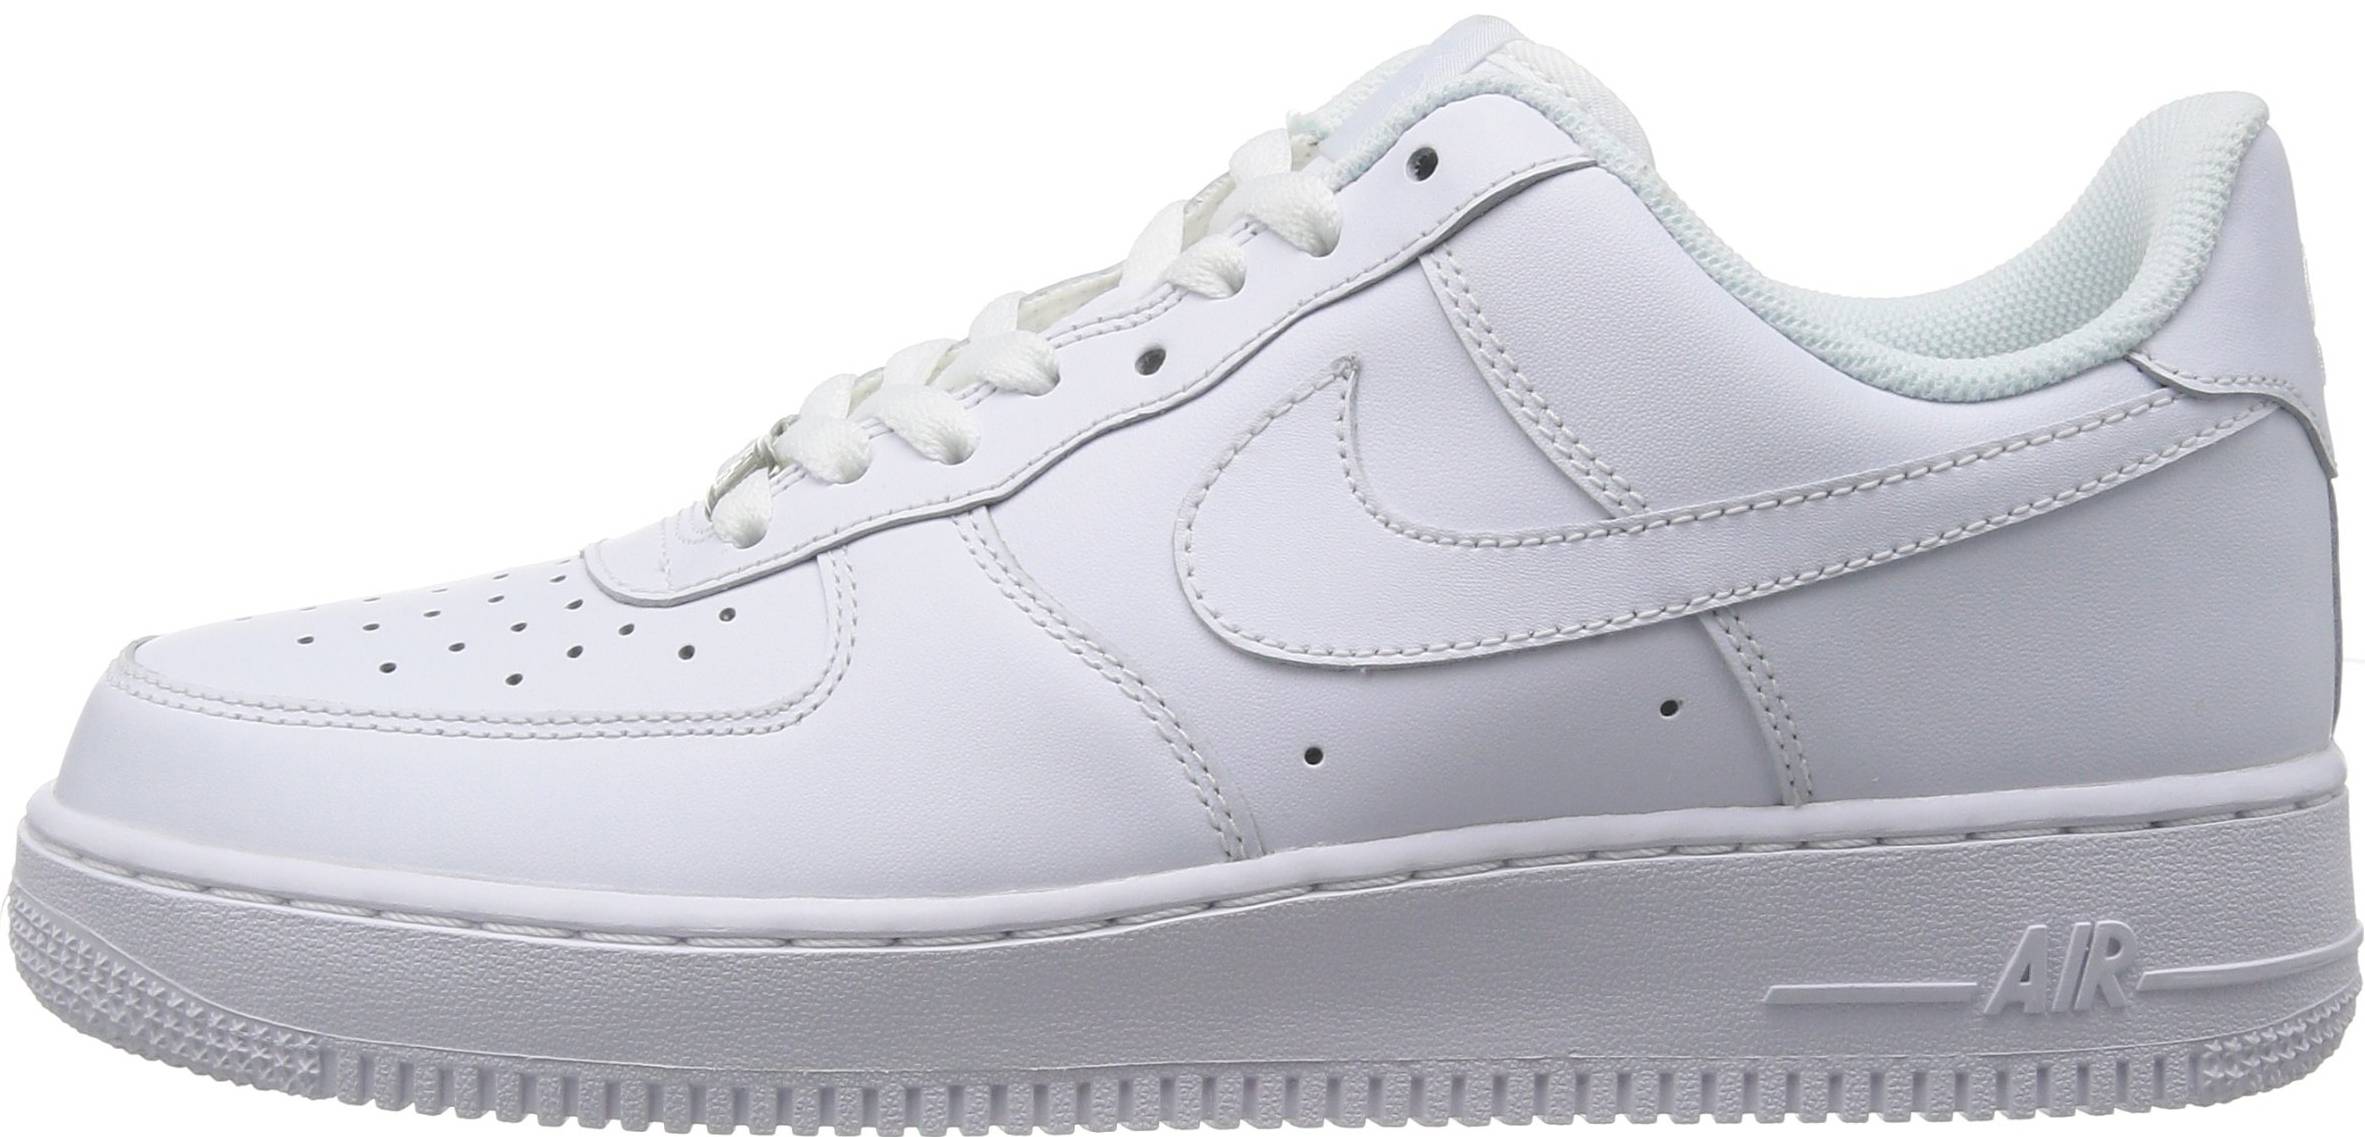 air force one shoes womens